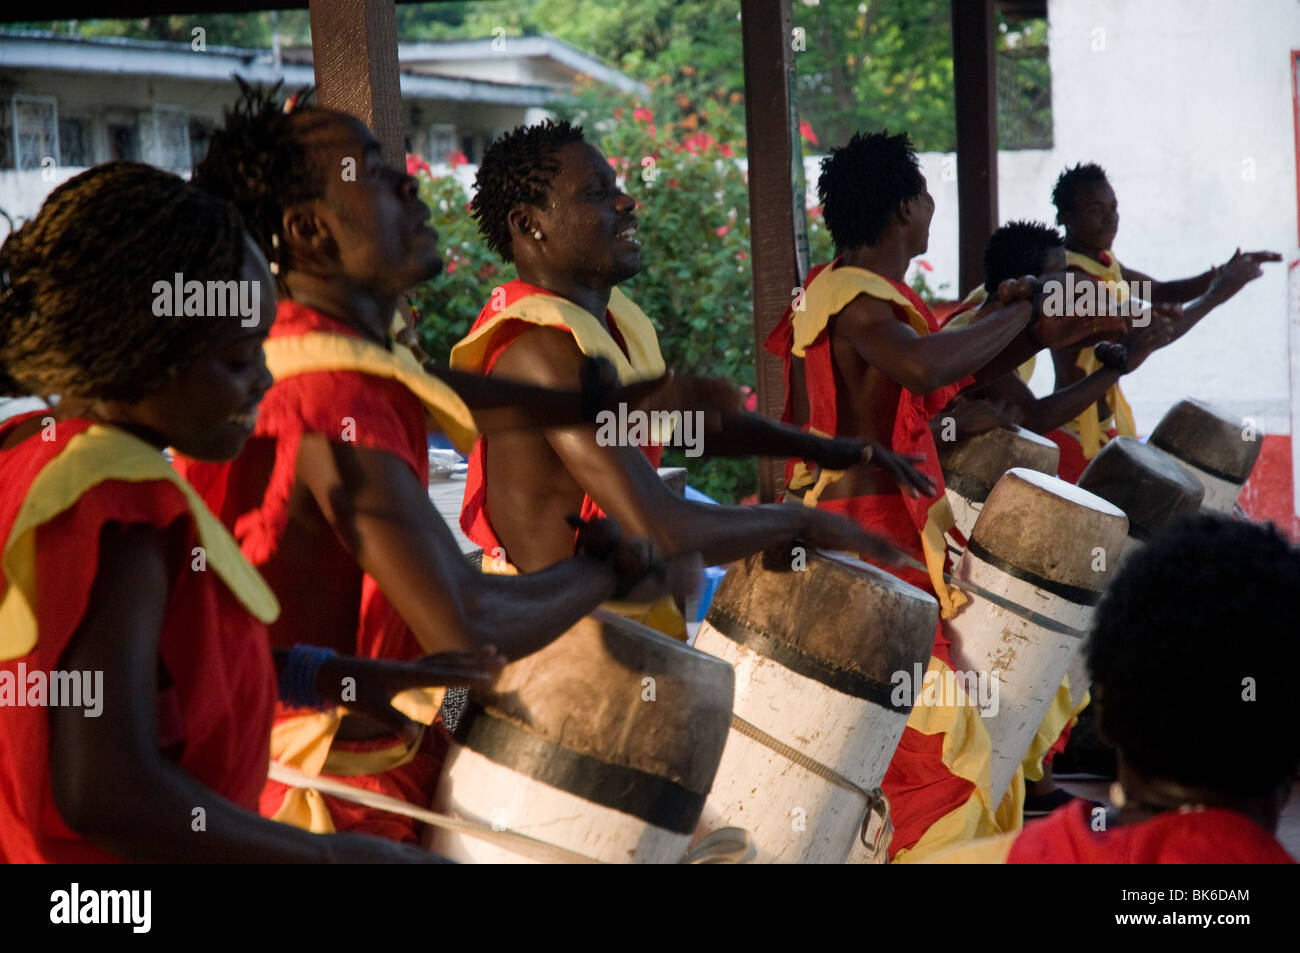 African percusion band Stock Photo